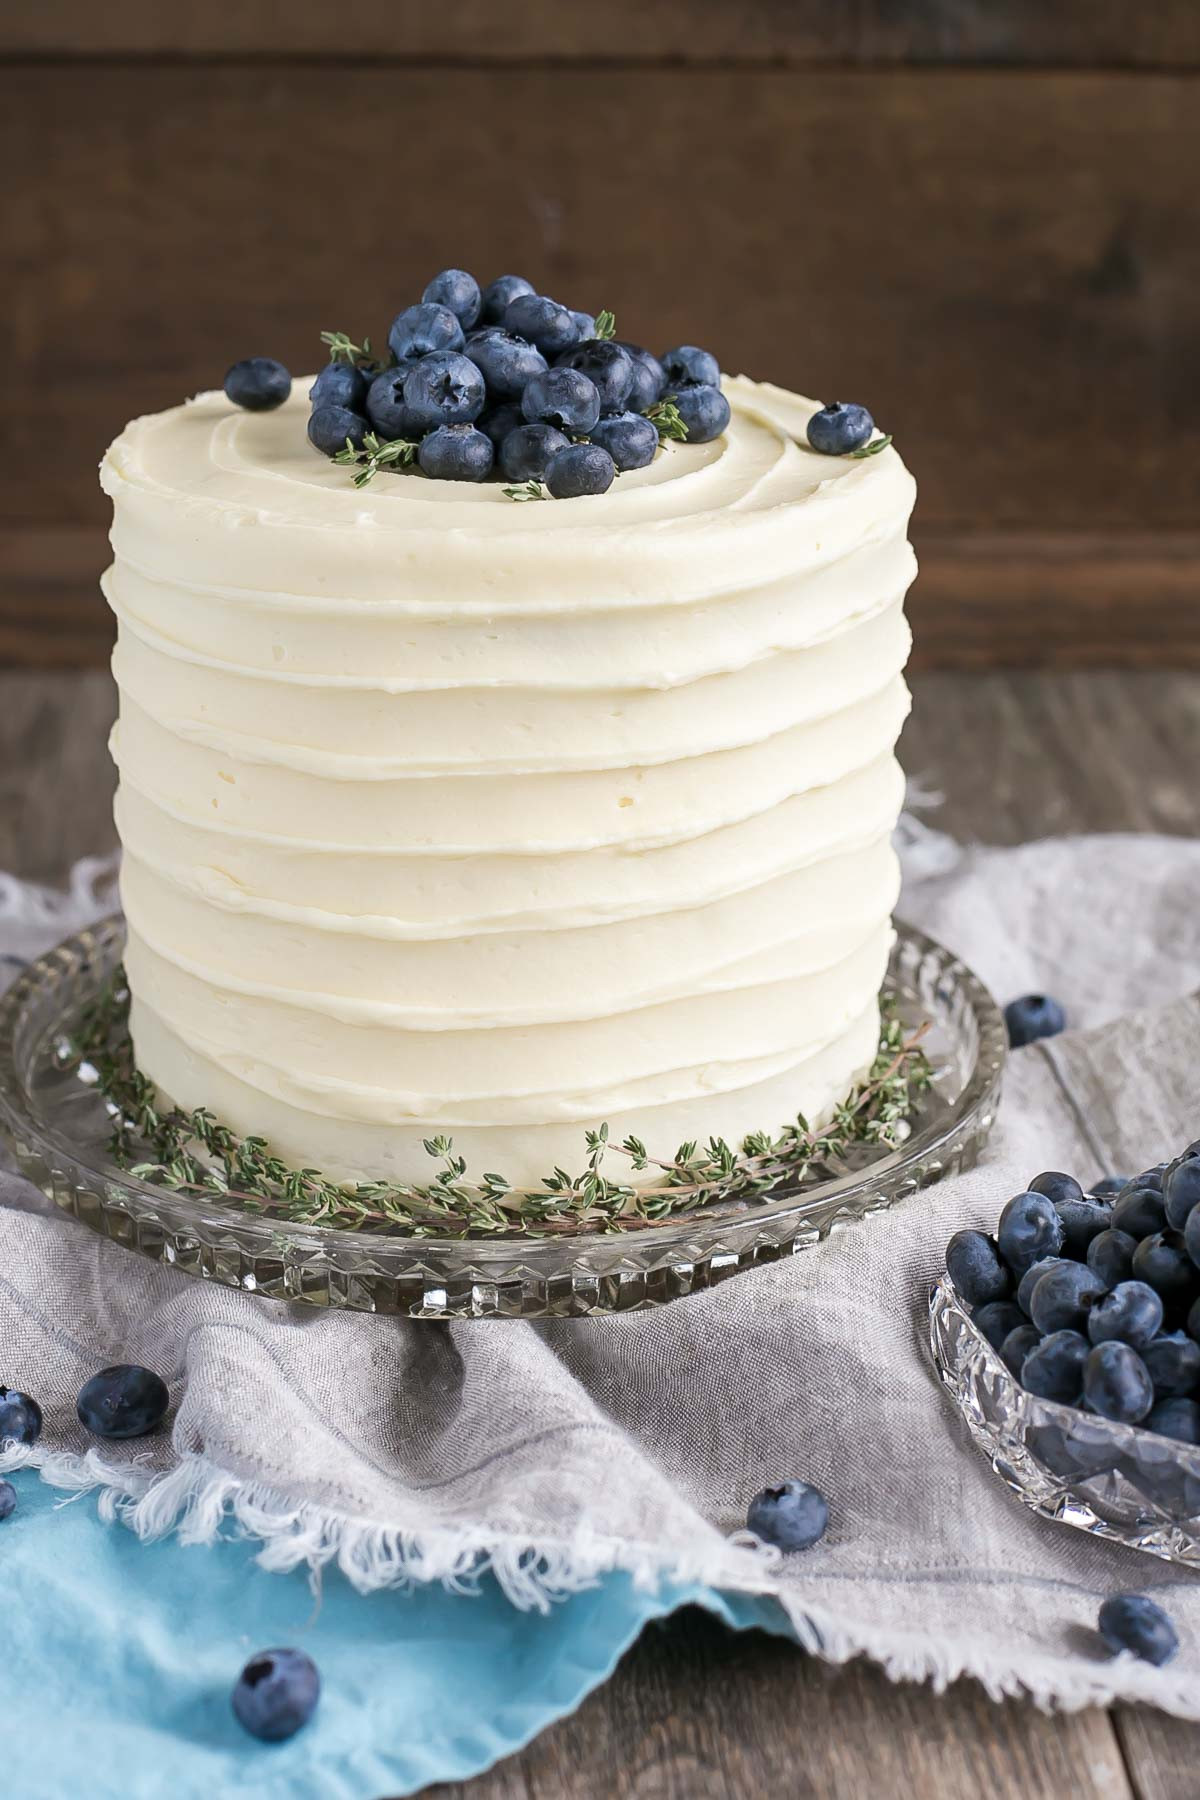 Blueberry Birthday Cake Recipes
 Blueberry Banana Cake with Cream Cheese Frosting